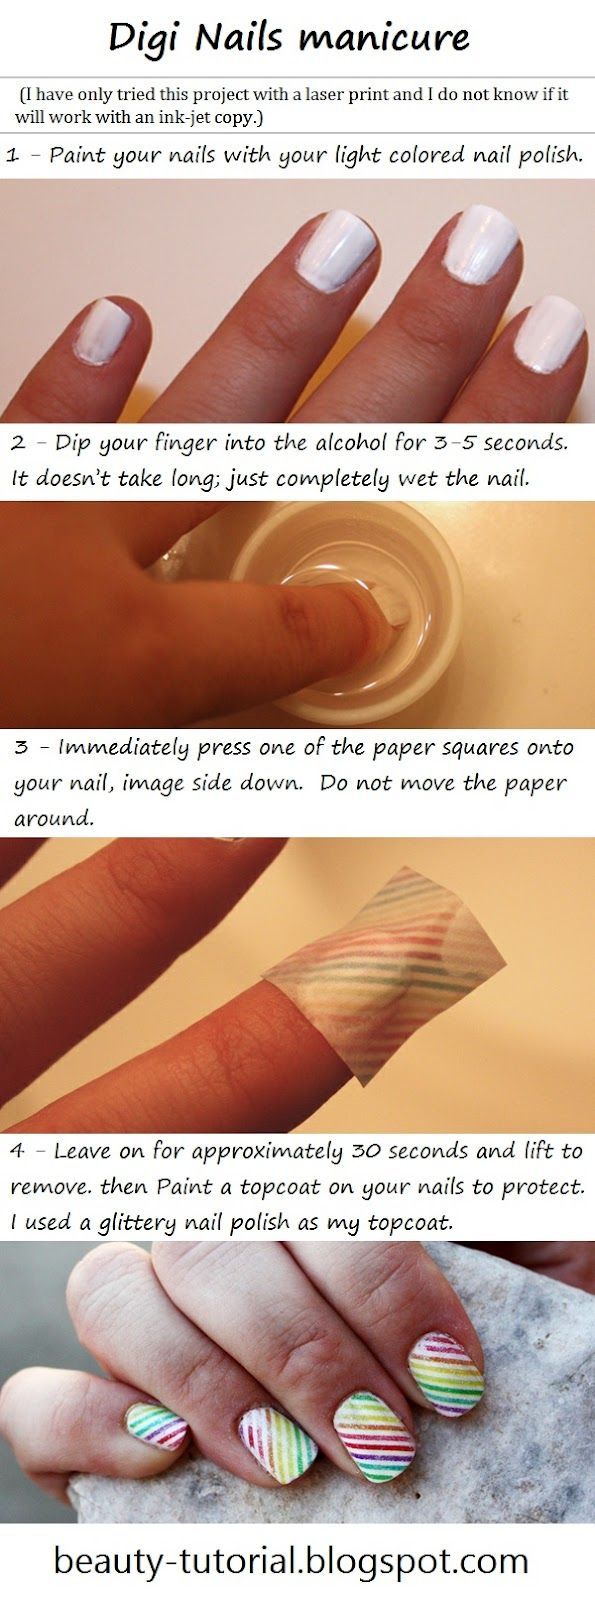 Pinteresting….use alcohol and scrapbook paper to create the nails you want!